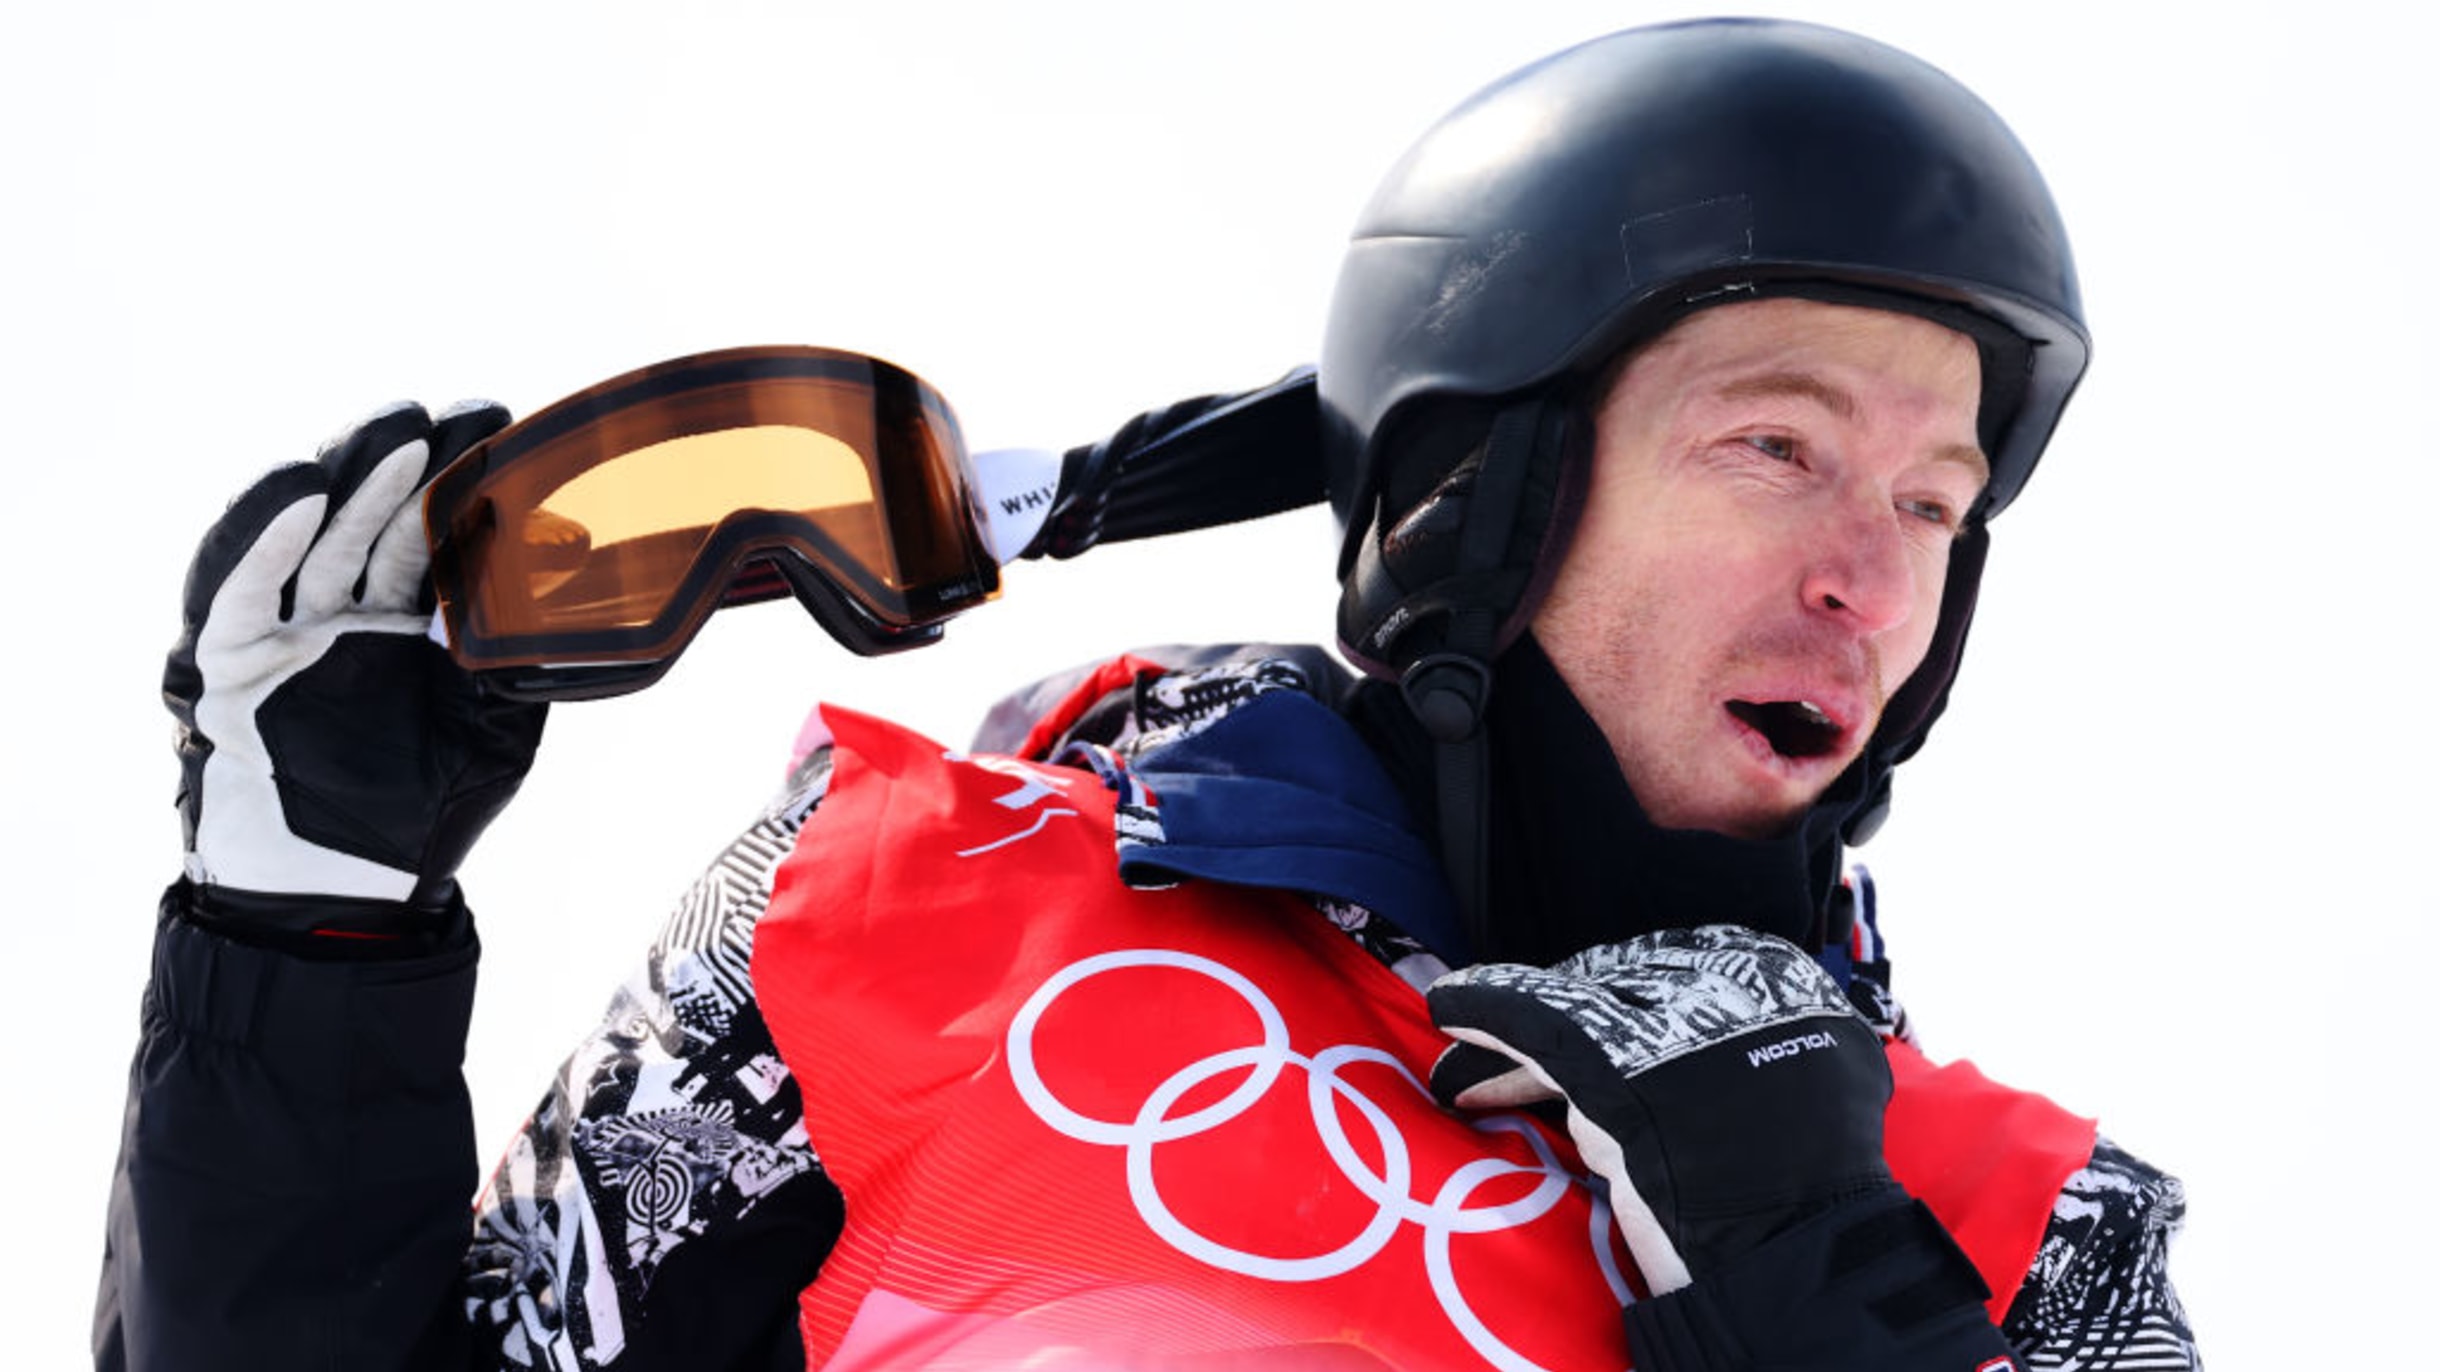 Mens snowboard Olympic halfpipe final Preview, schedule and how to watch Shaun White and Hirano Ayumu